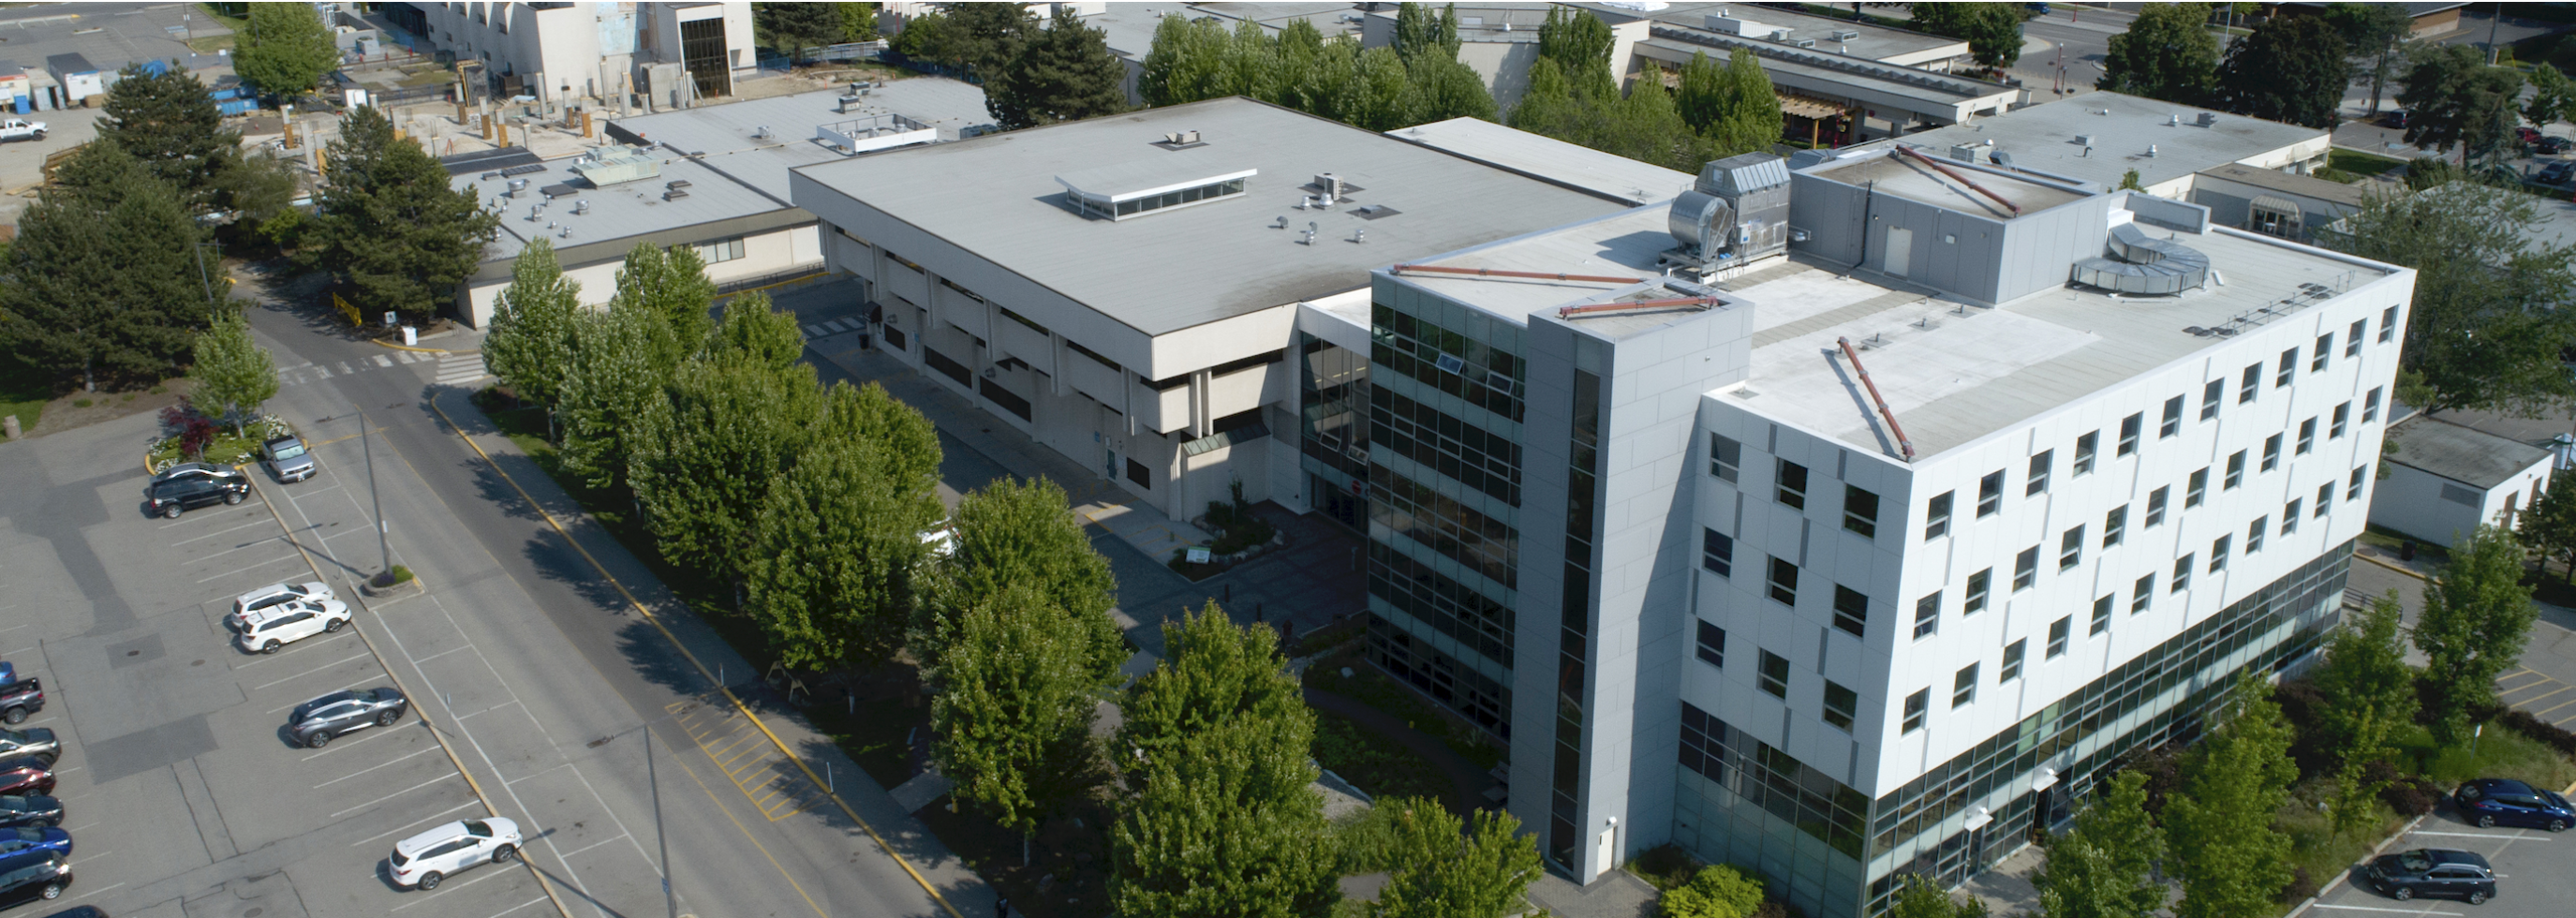 91̽'s Kelowna campus is located at 1000 KLO Rd.